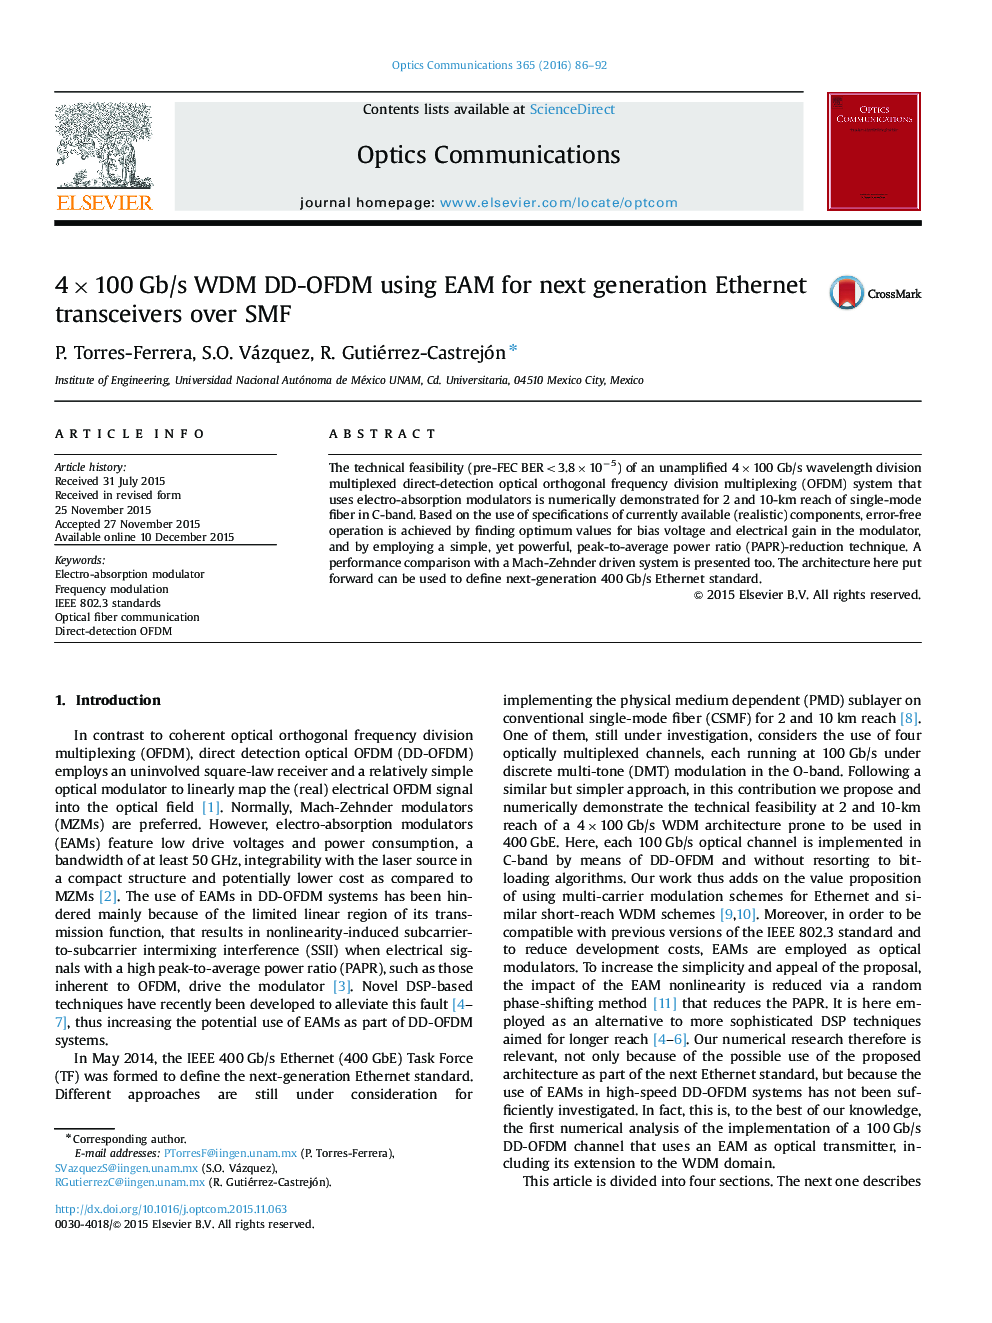 4×100 Gb/s WDM DD-OFDM using EAM for next generation Ethernet transceivers over SMF